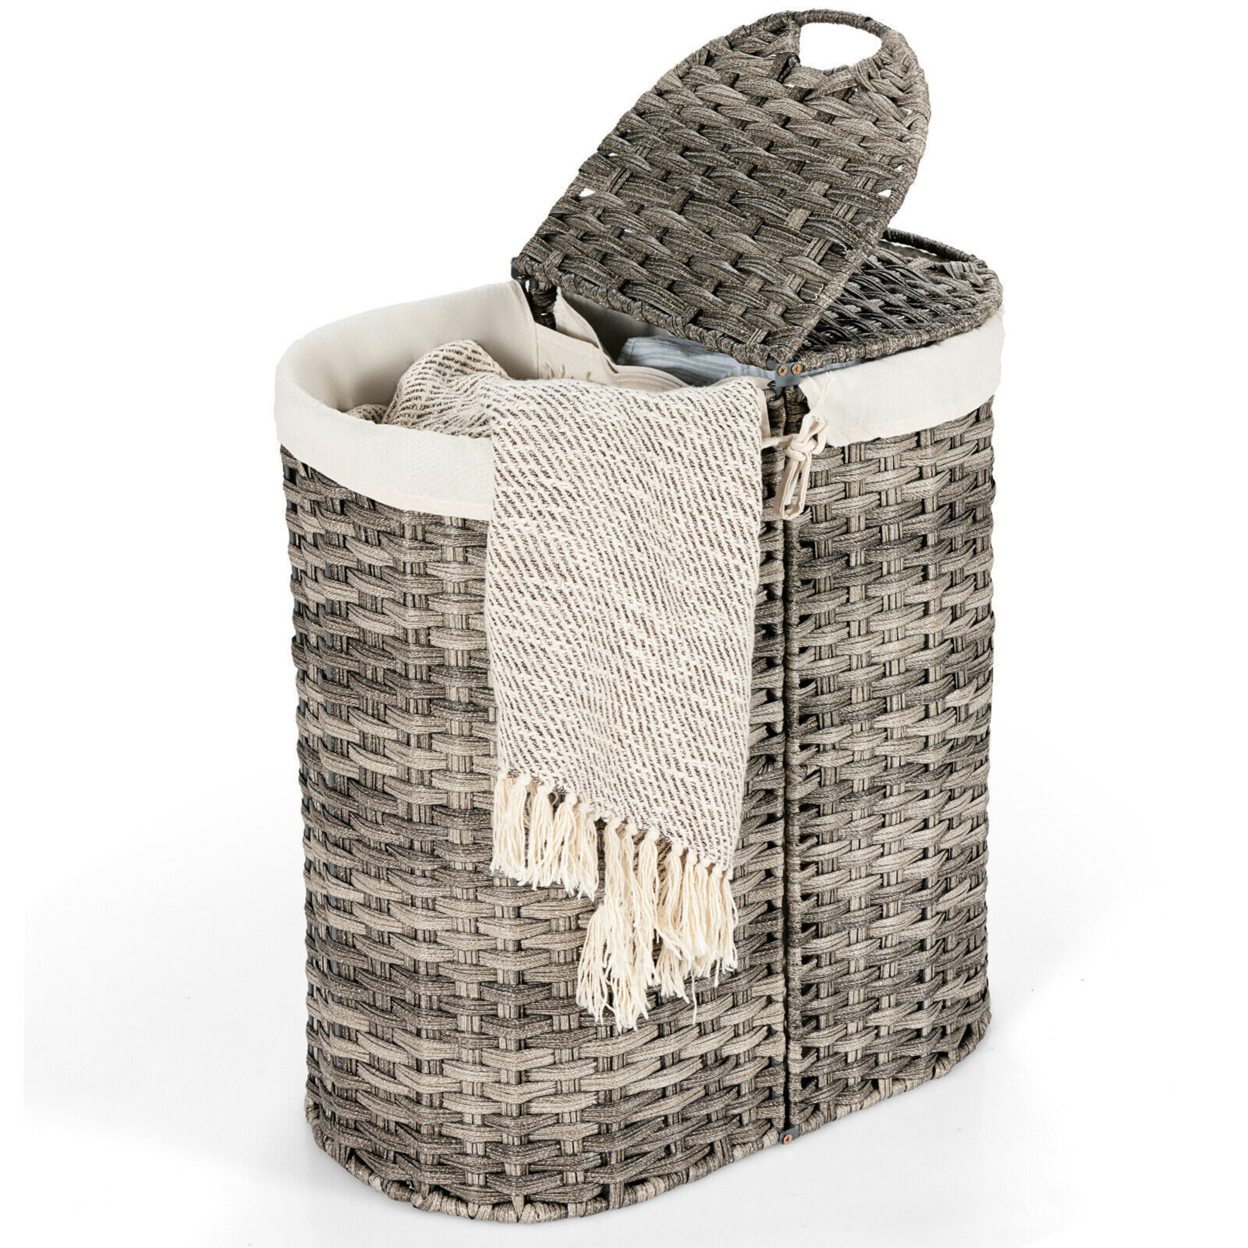 Handwoven Laundry Hamper Laundry Basket W/2 Removable Liner Bags - Grey